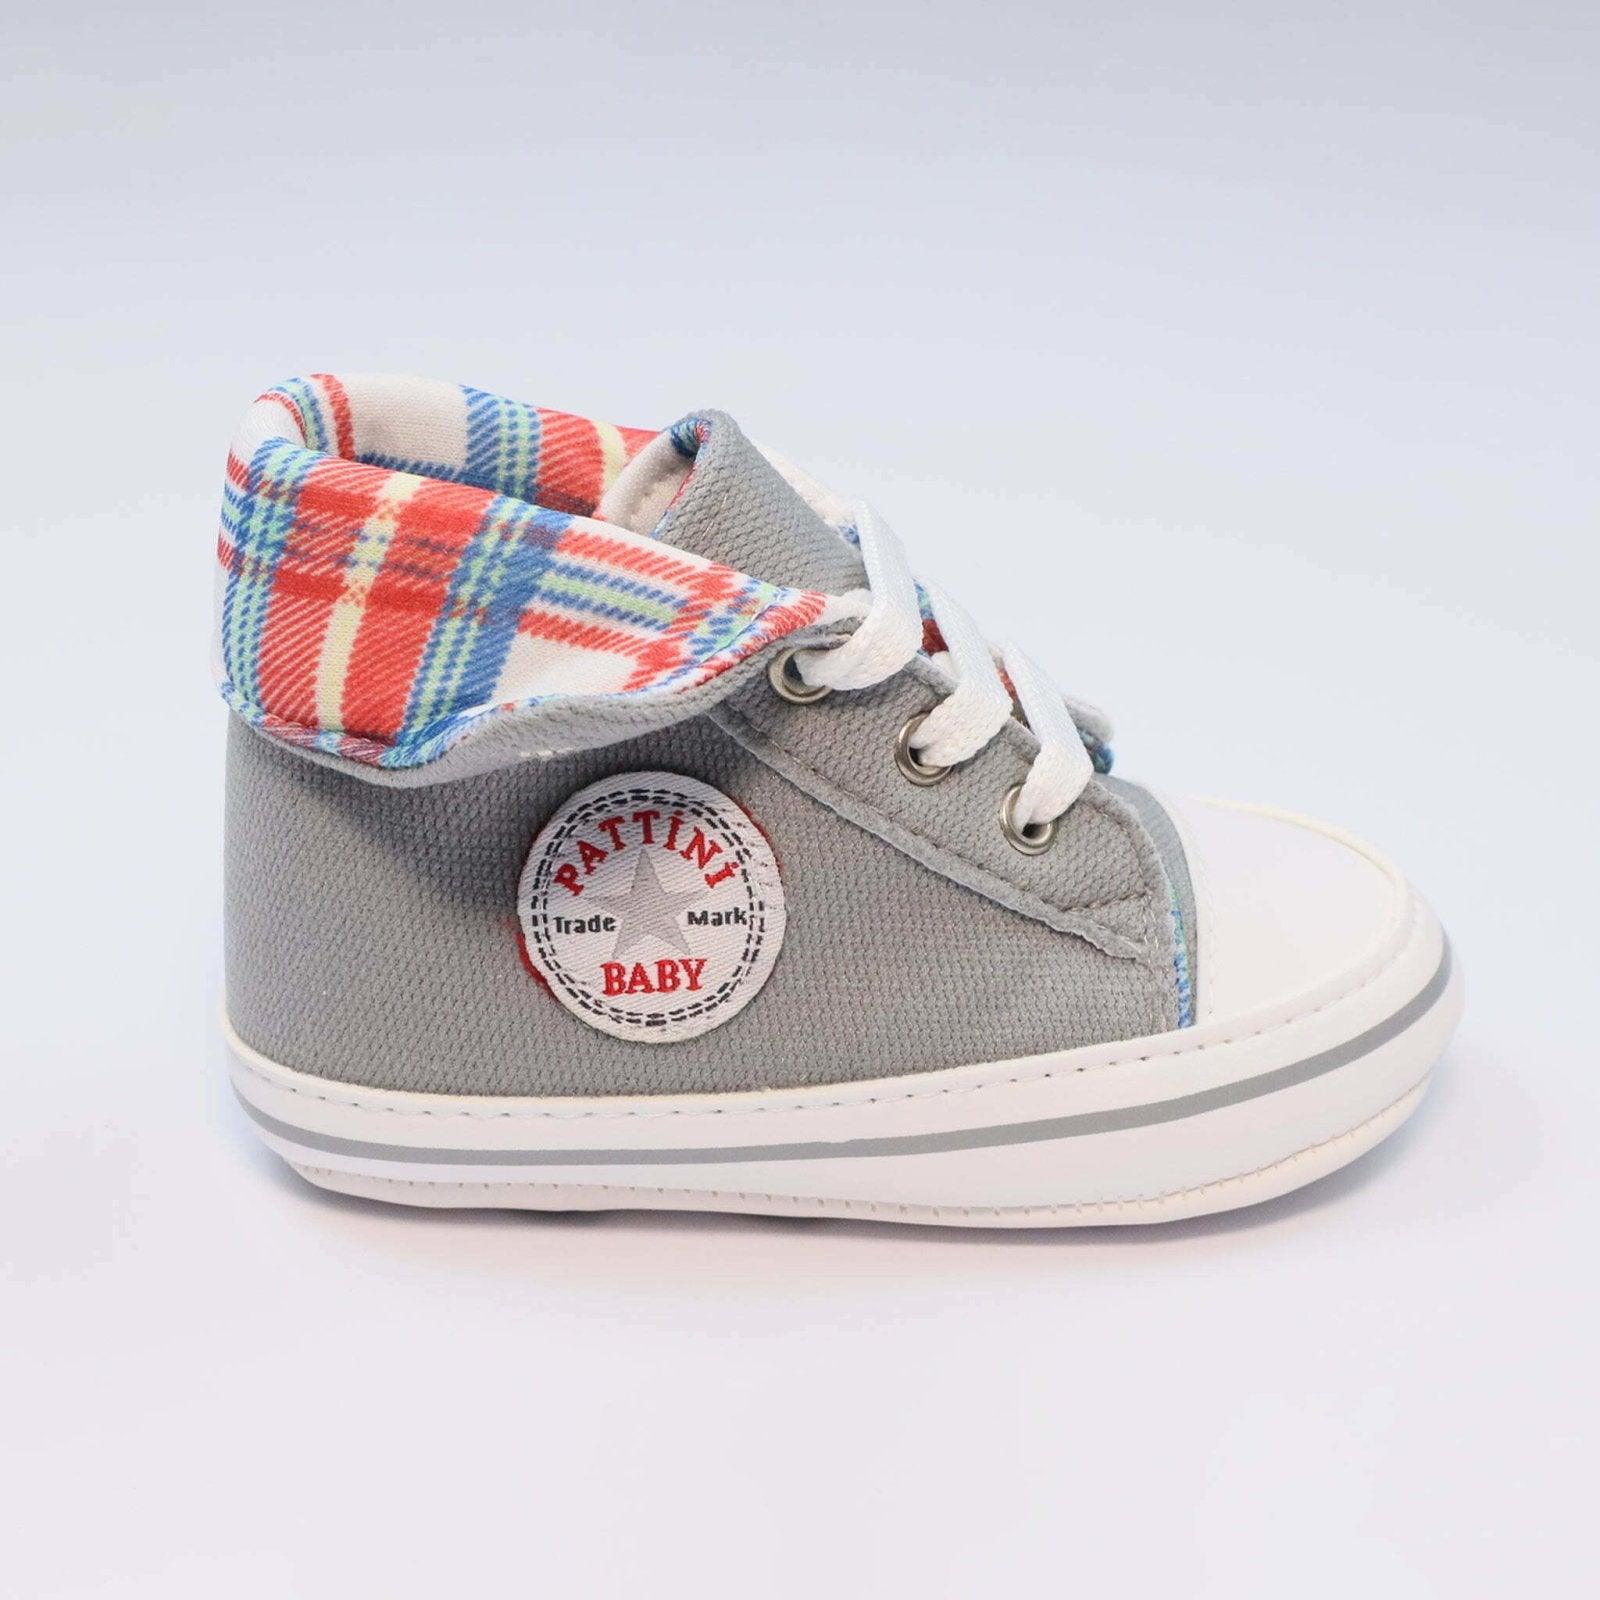 Baby Shoes Gray Color Check Print by Baby Pattini